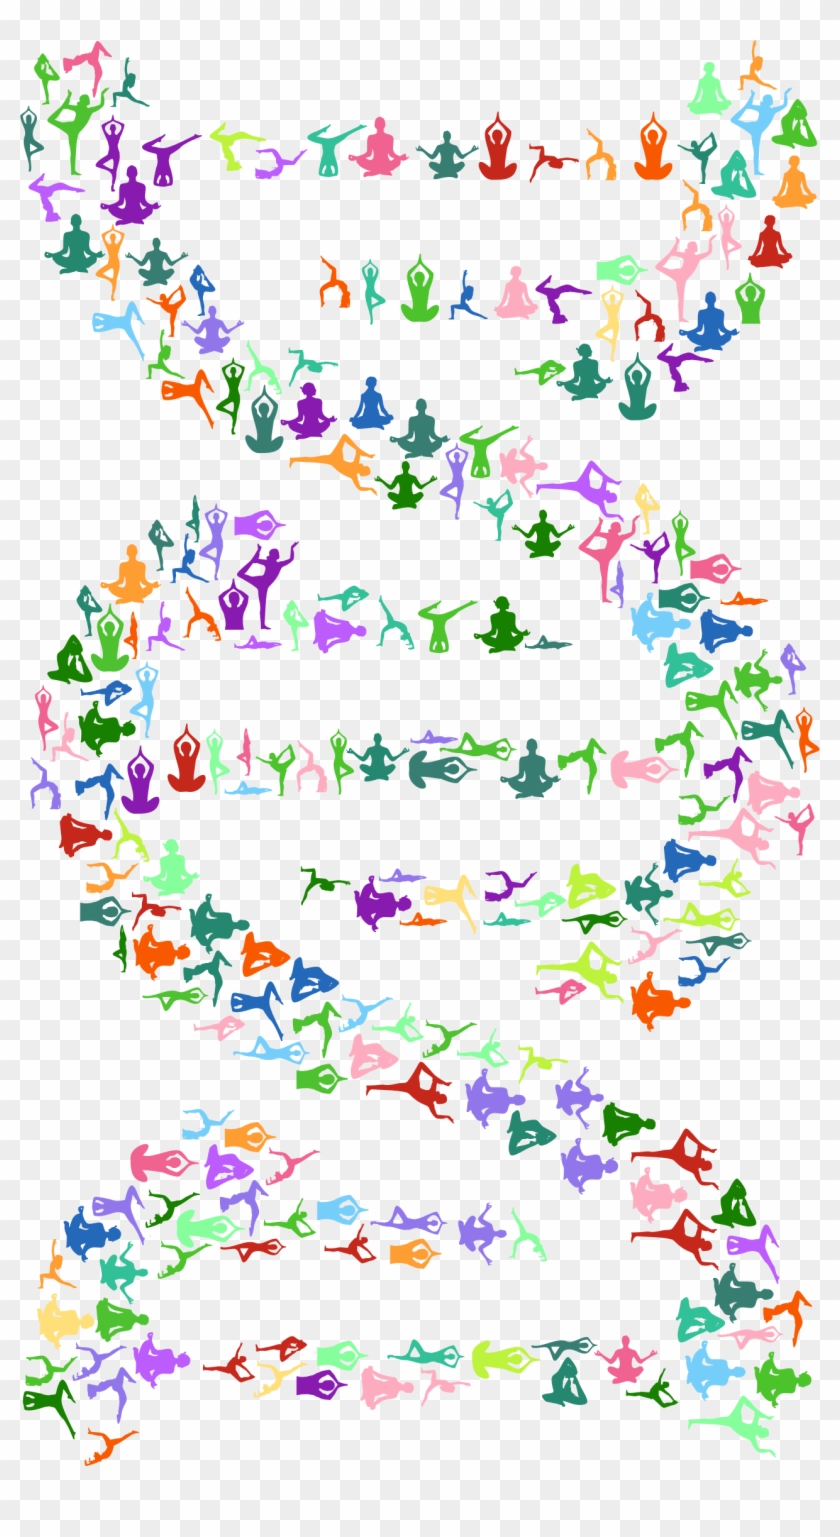 This Free Icons Png Design Of Yoga Dna Clipart #1014846